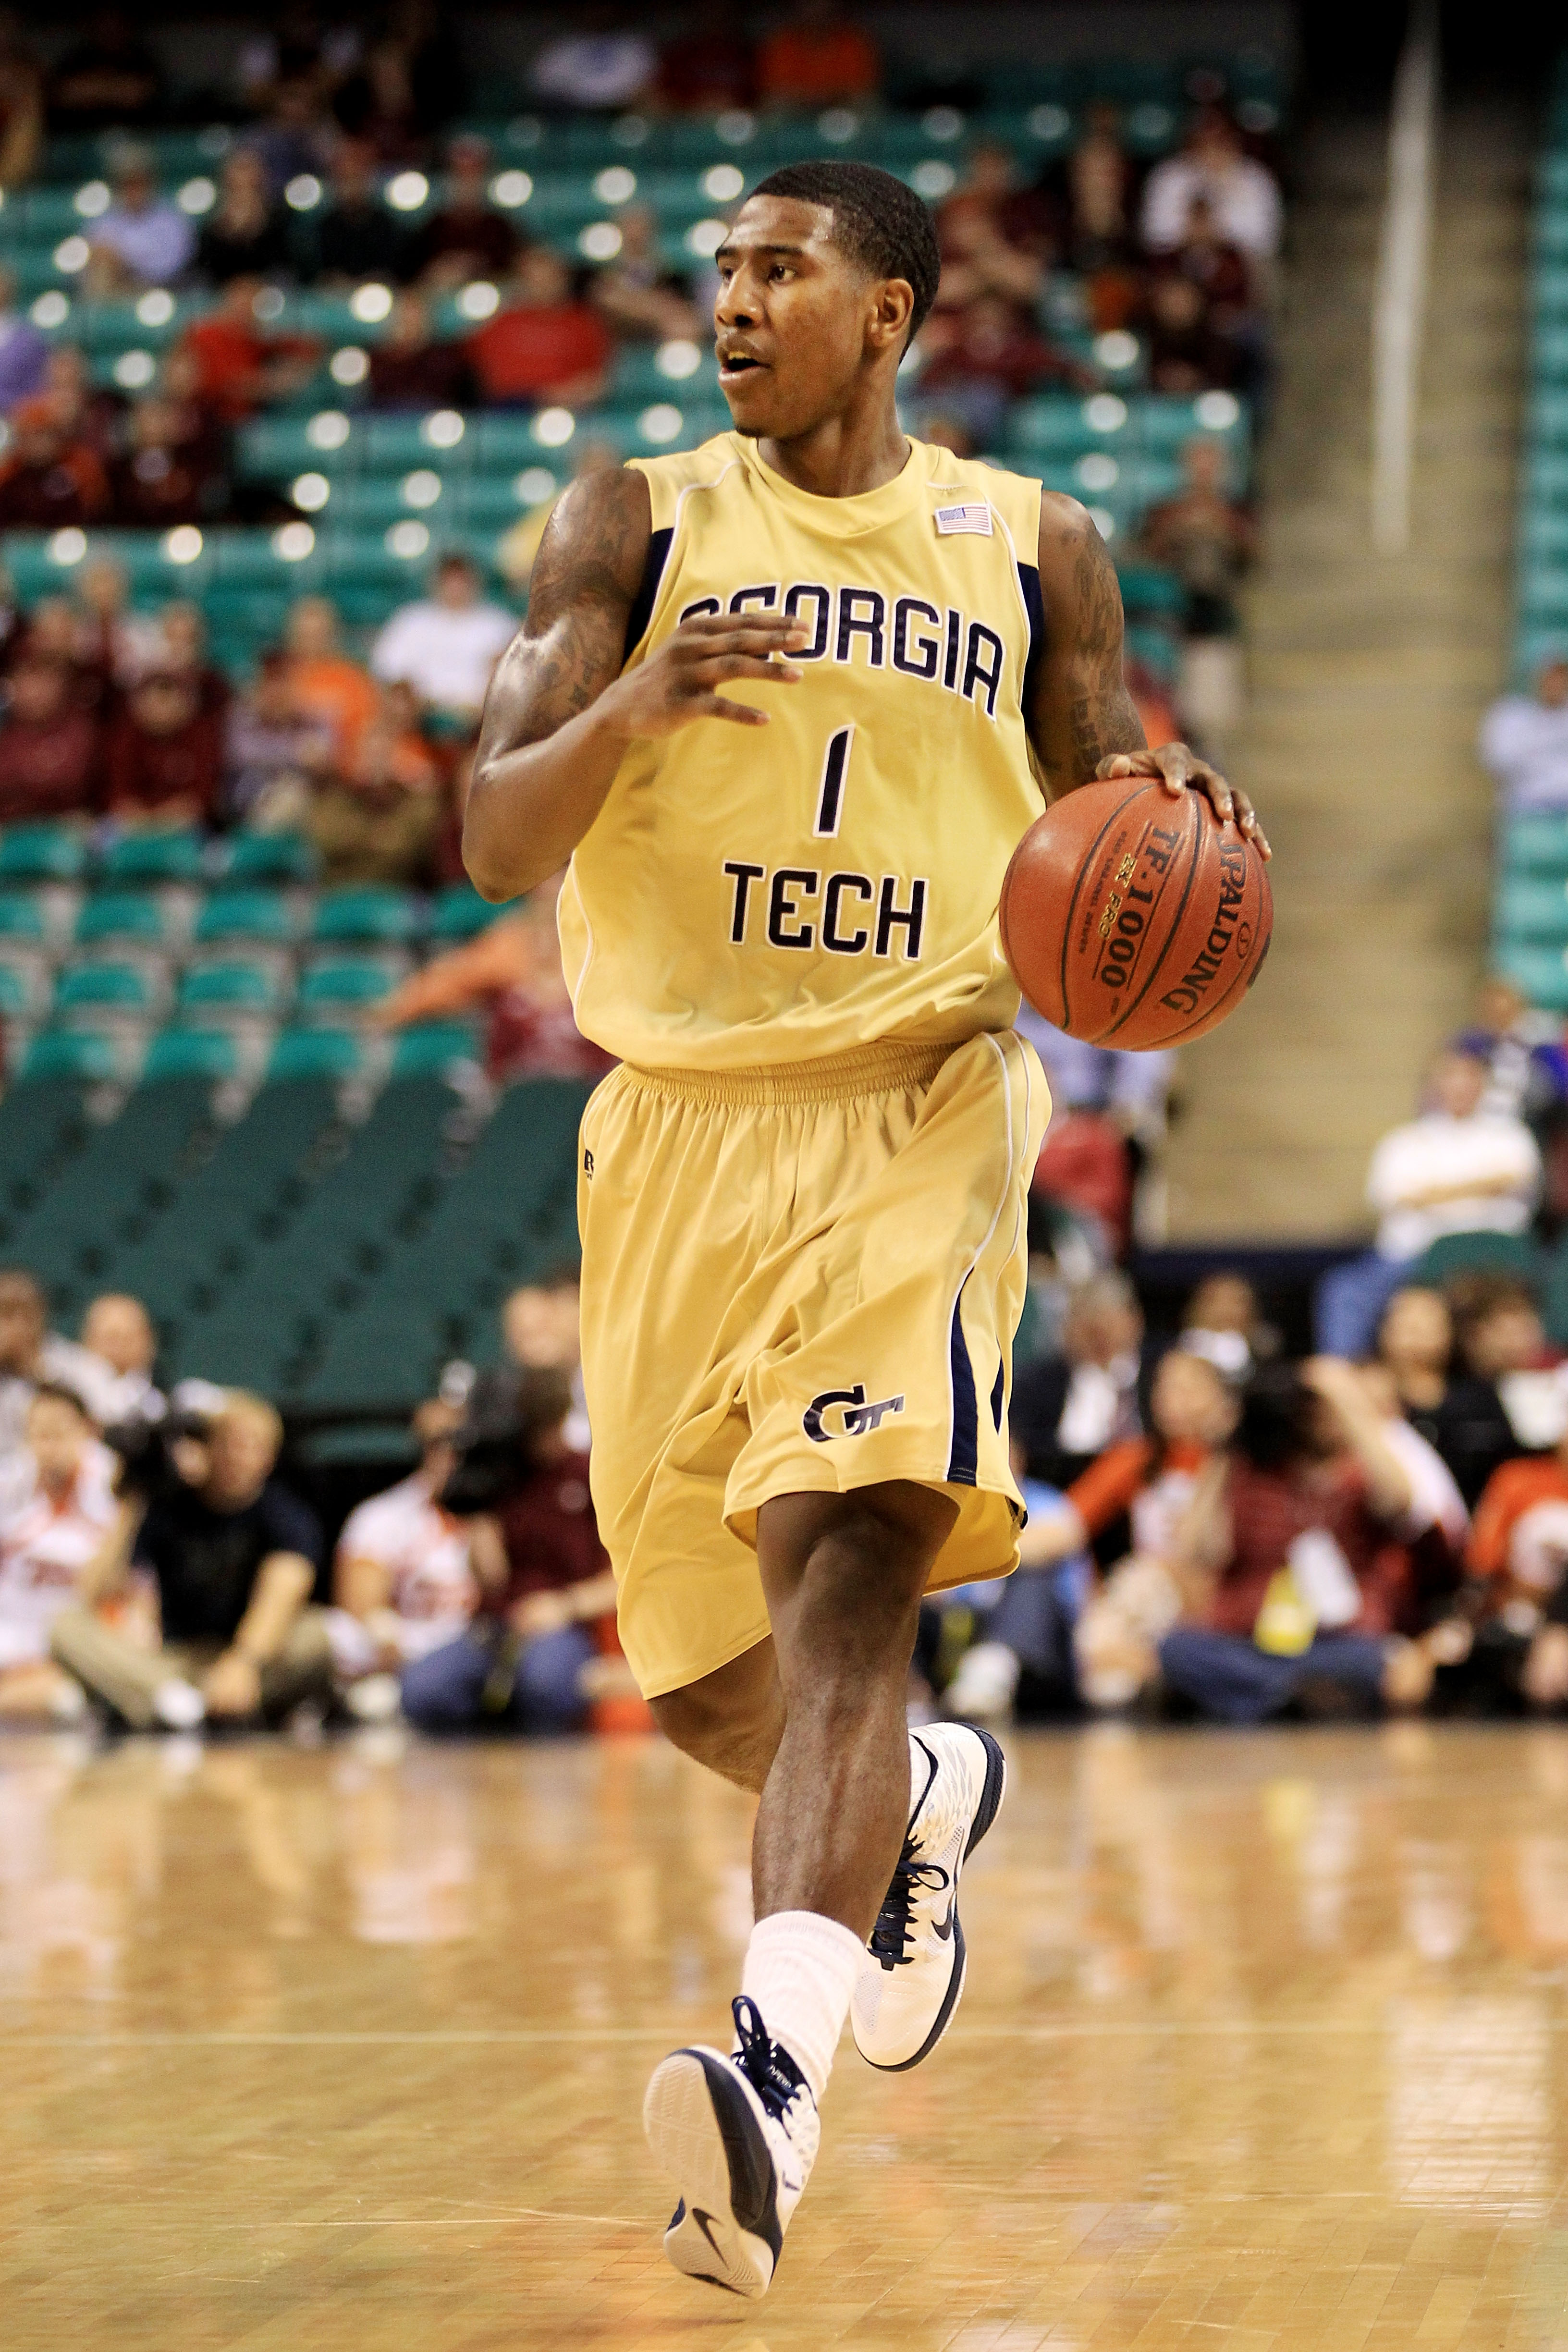 GREENSBORO, NC - MARCH 10:  Iman Shumpert #1 of the Georgia Tech Yellow Jackets dribbles down the court during the second half of the game against the Virginia Tech Hokies in the first round of the 2011 ACC men's basketball tournament at the Greensboro Co